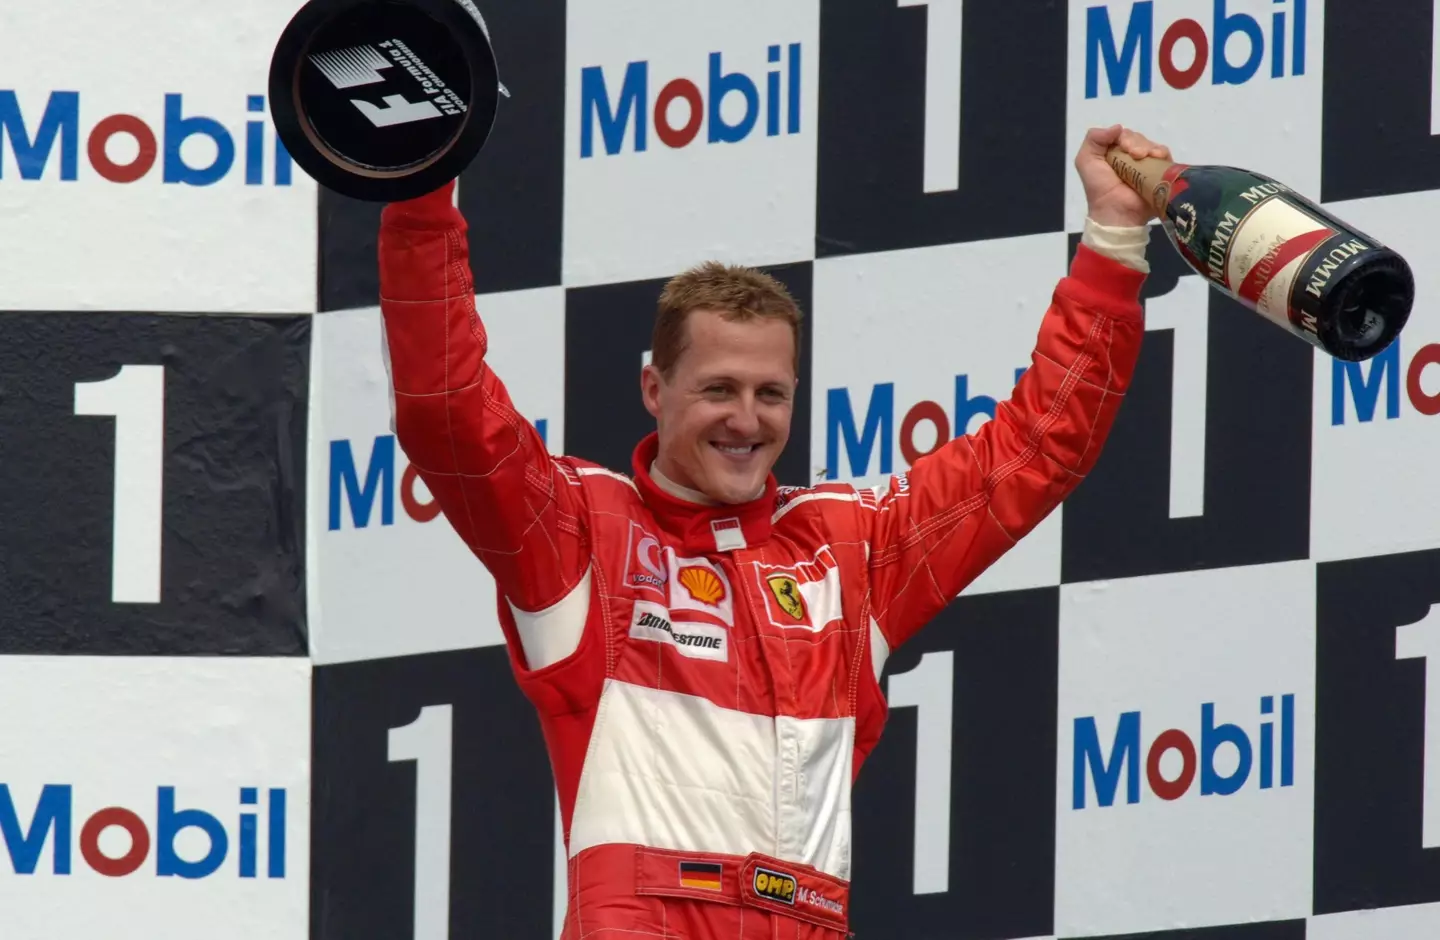 Michael Schumacher was involved in a tragic skiing accident in 2013 and hasn't been seen in public since.